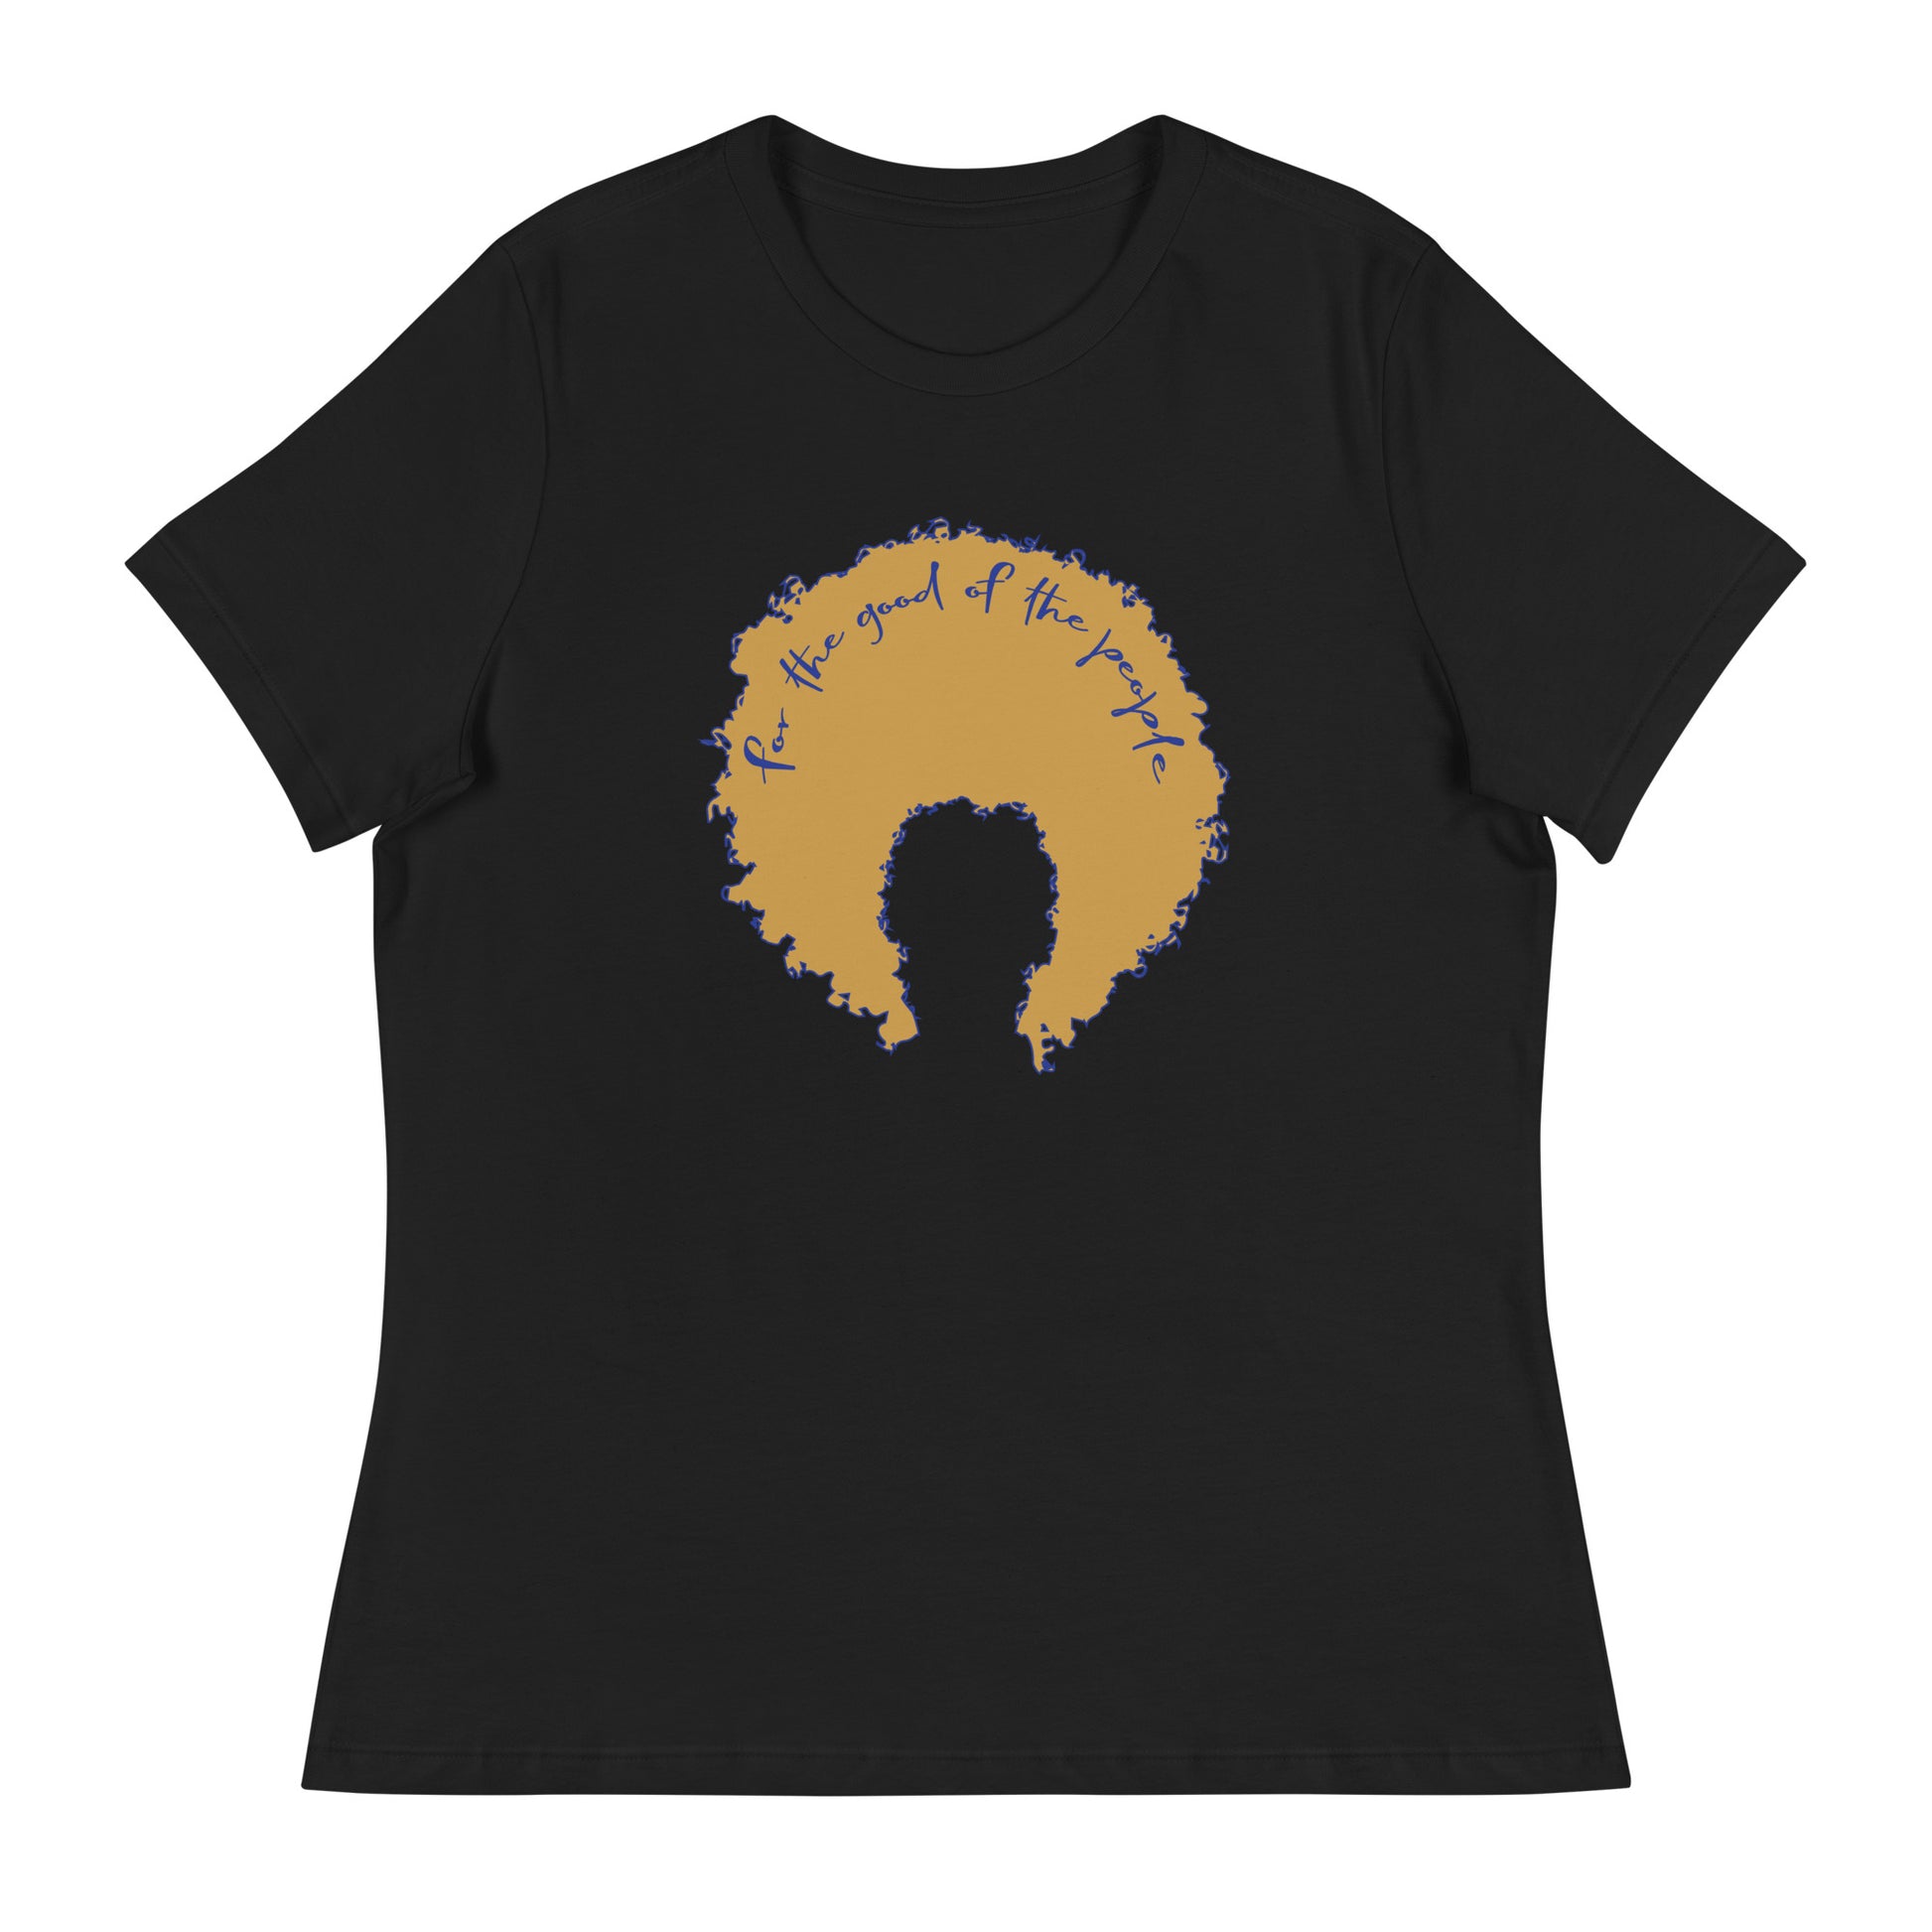 Black women's tee with gold afro graphic trimmed in blue with for the good of the people in pink on the inside top of the afro.